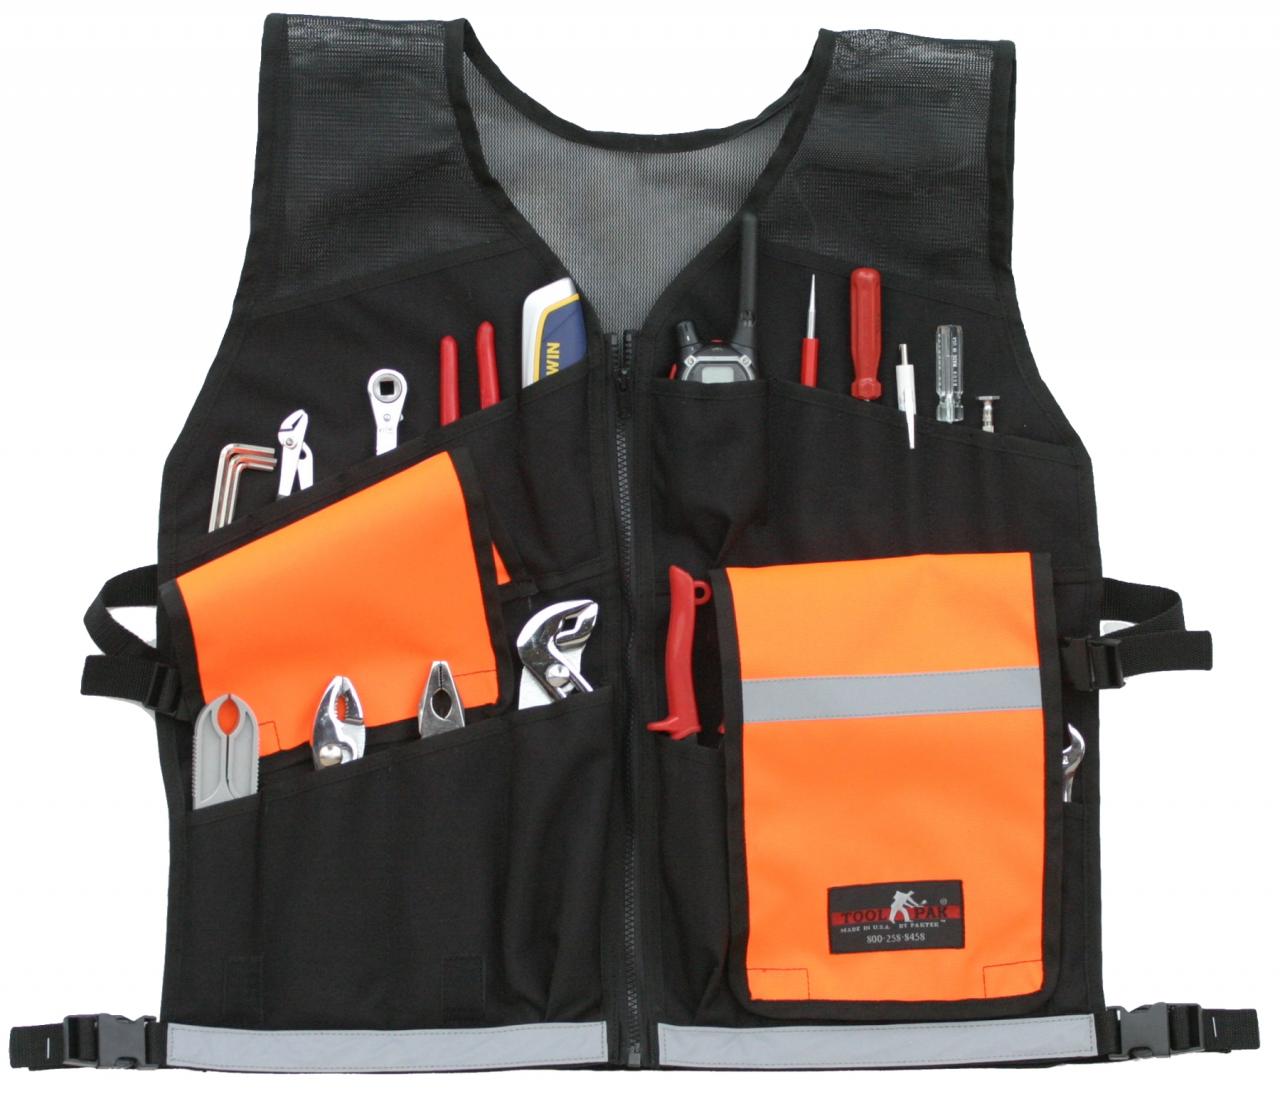 Tool Vests That Help You Get the Job Done on Time | Builder Magazine